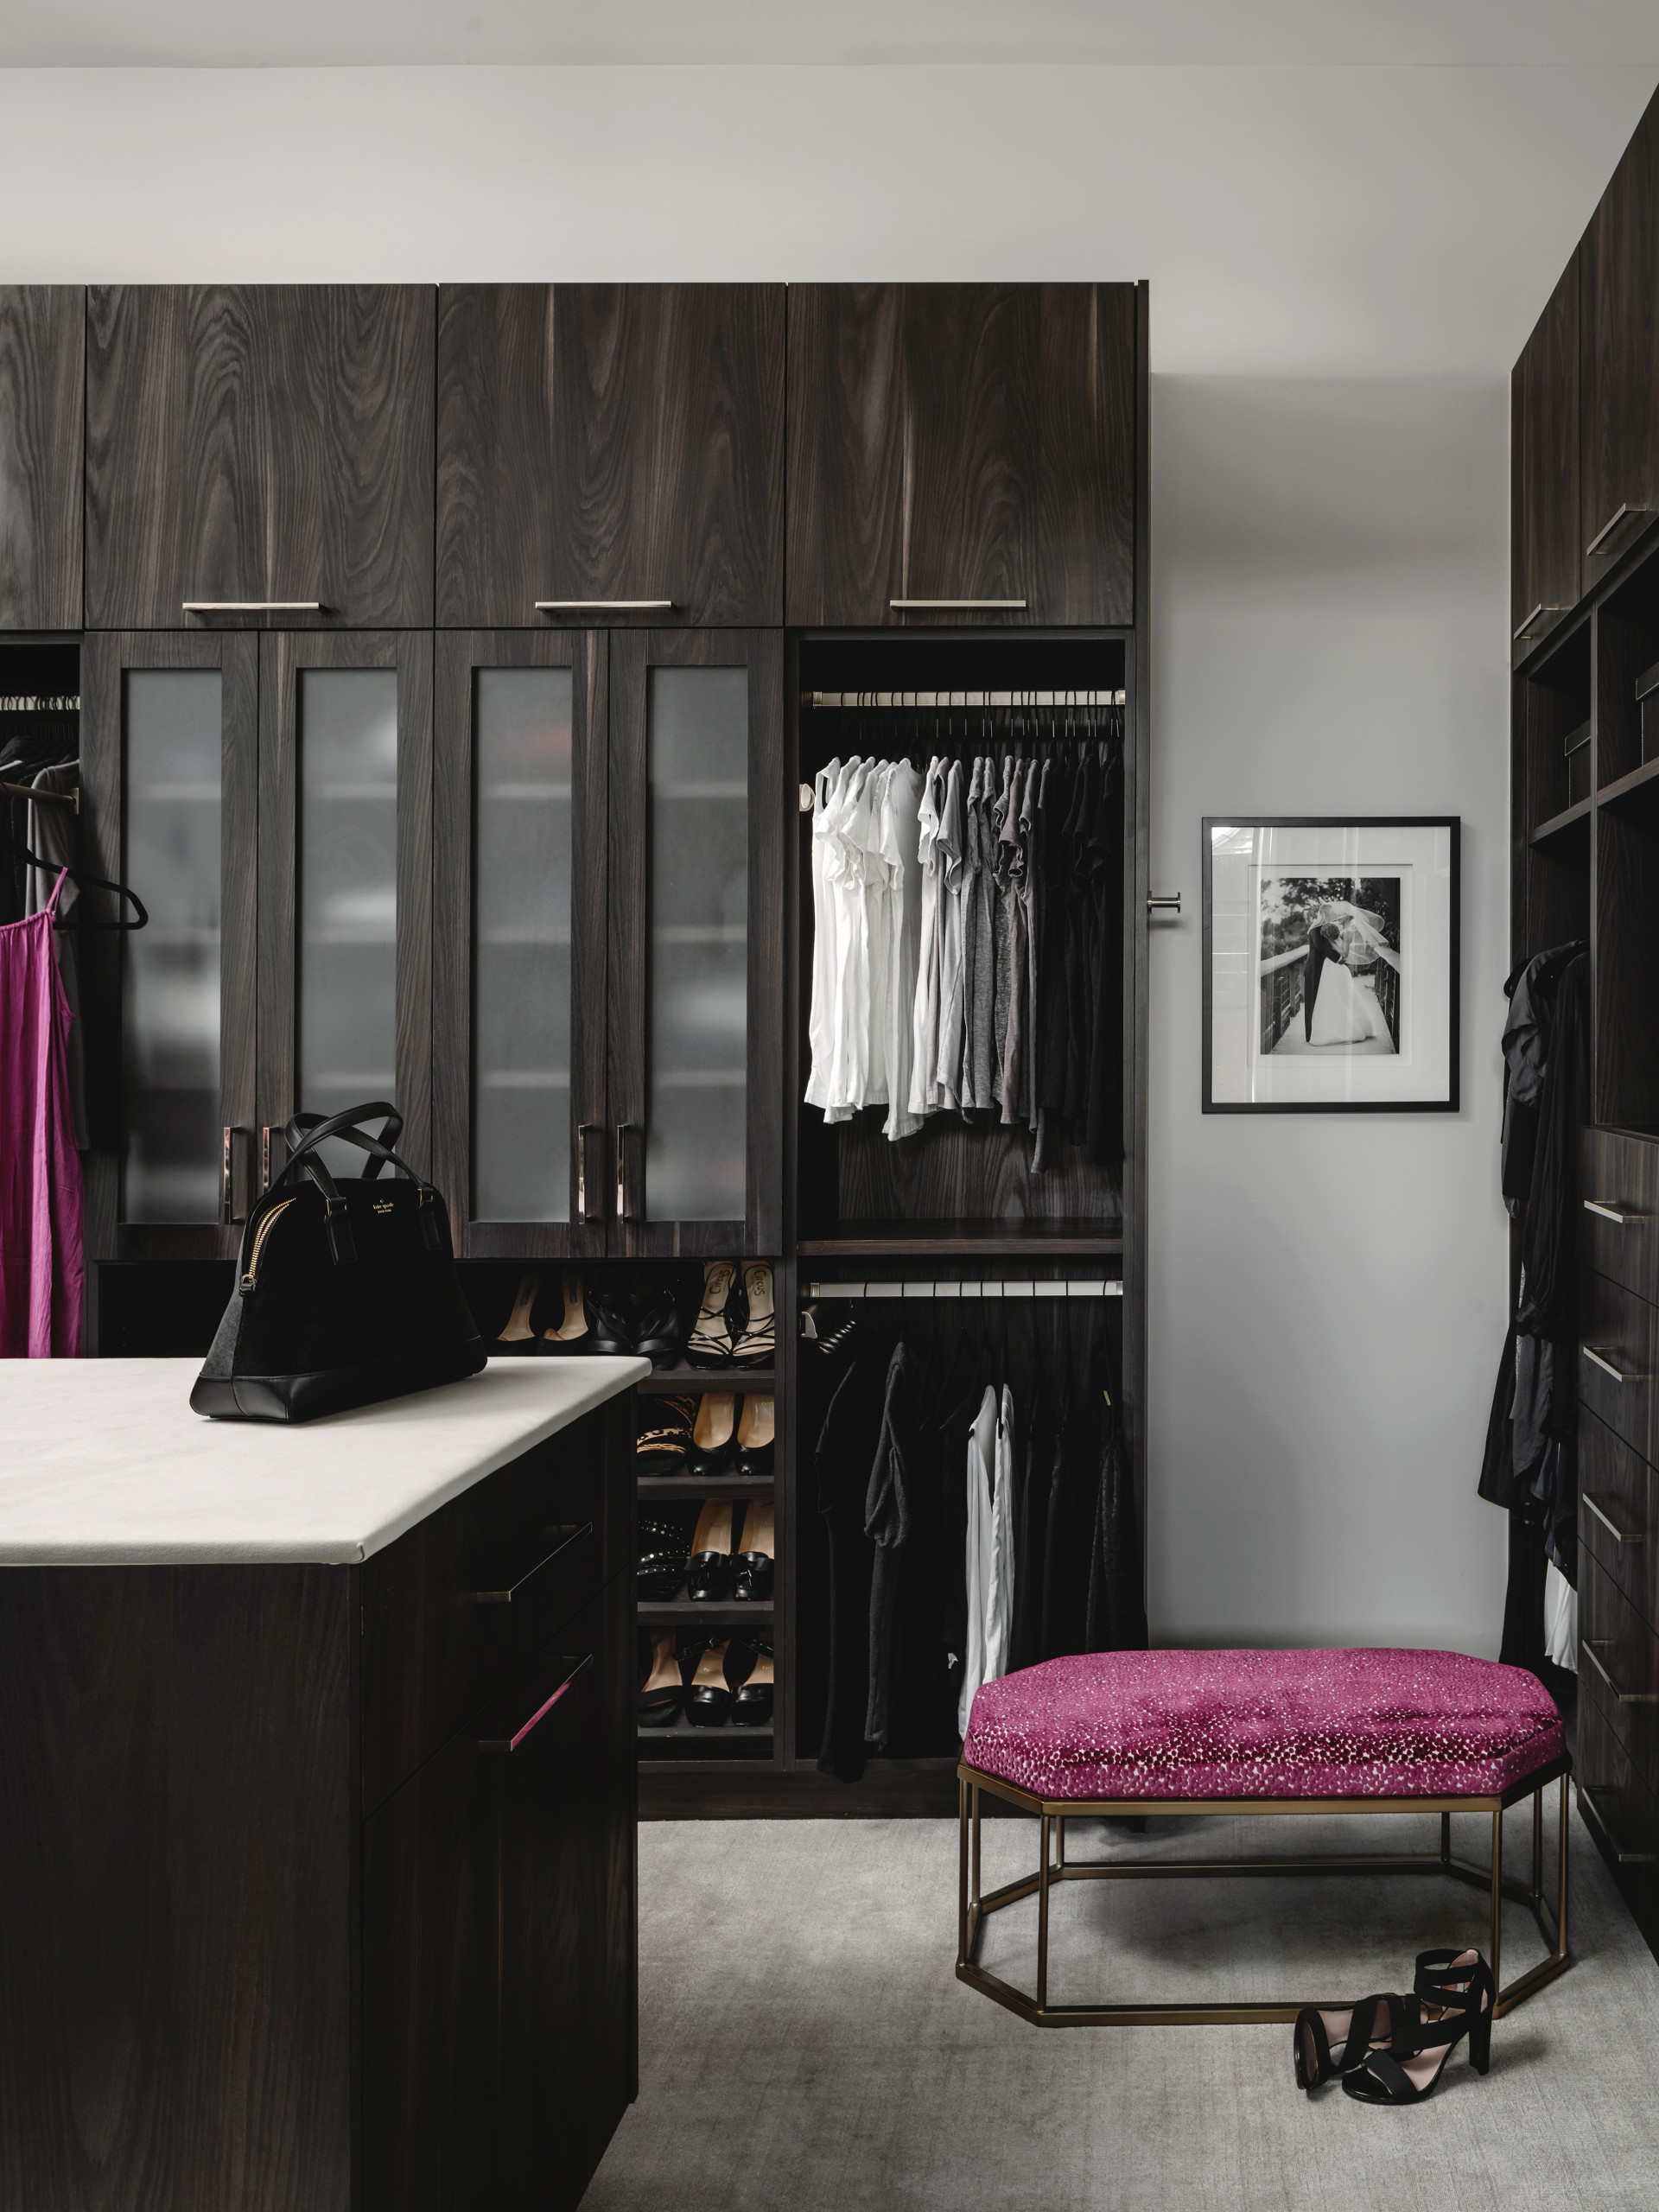 15 contemporary walk-in closet designs that maximize space and style